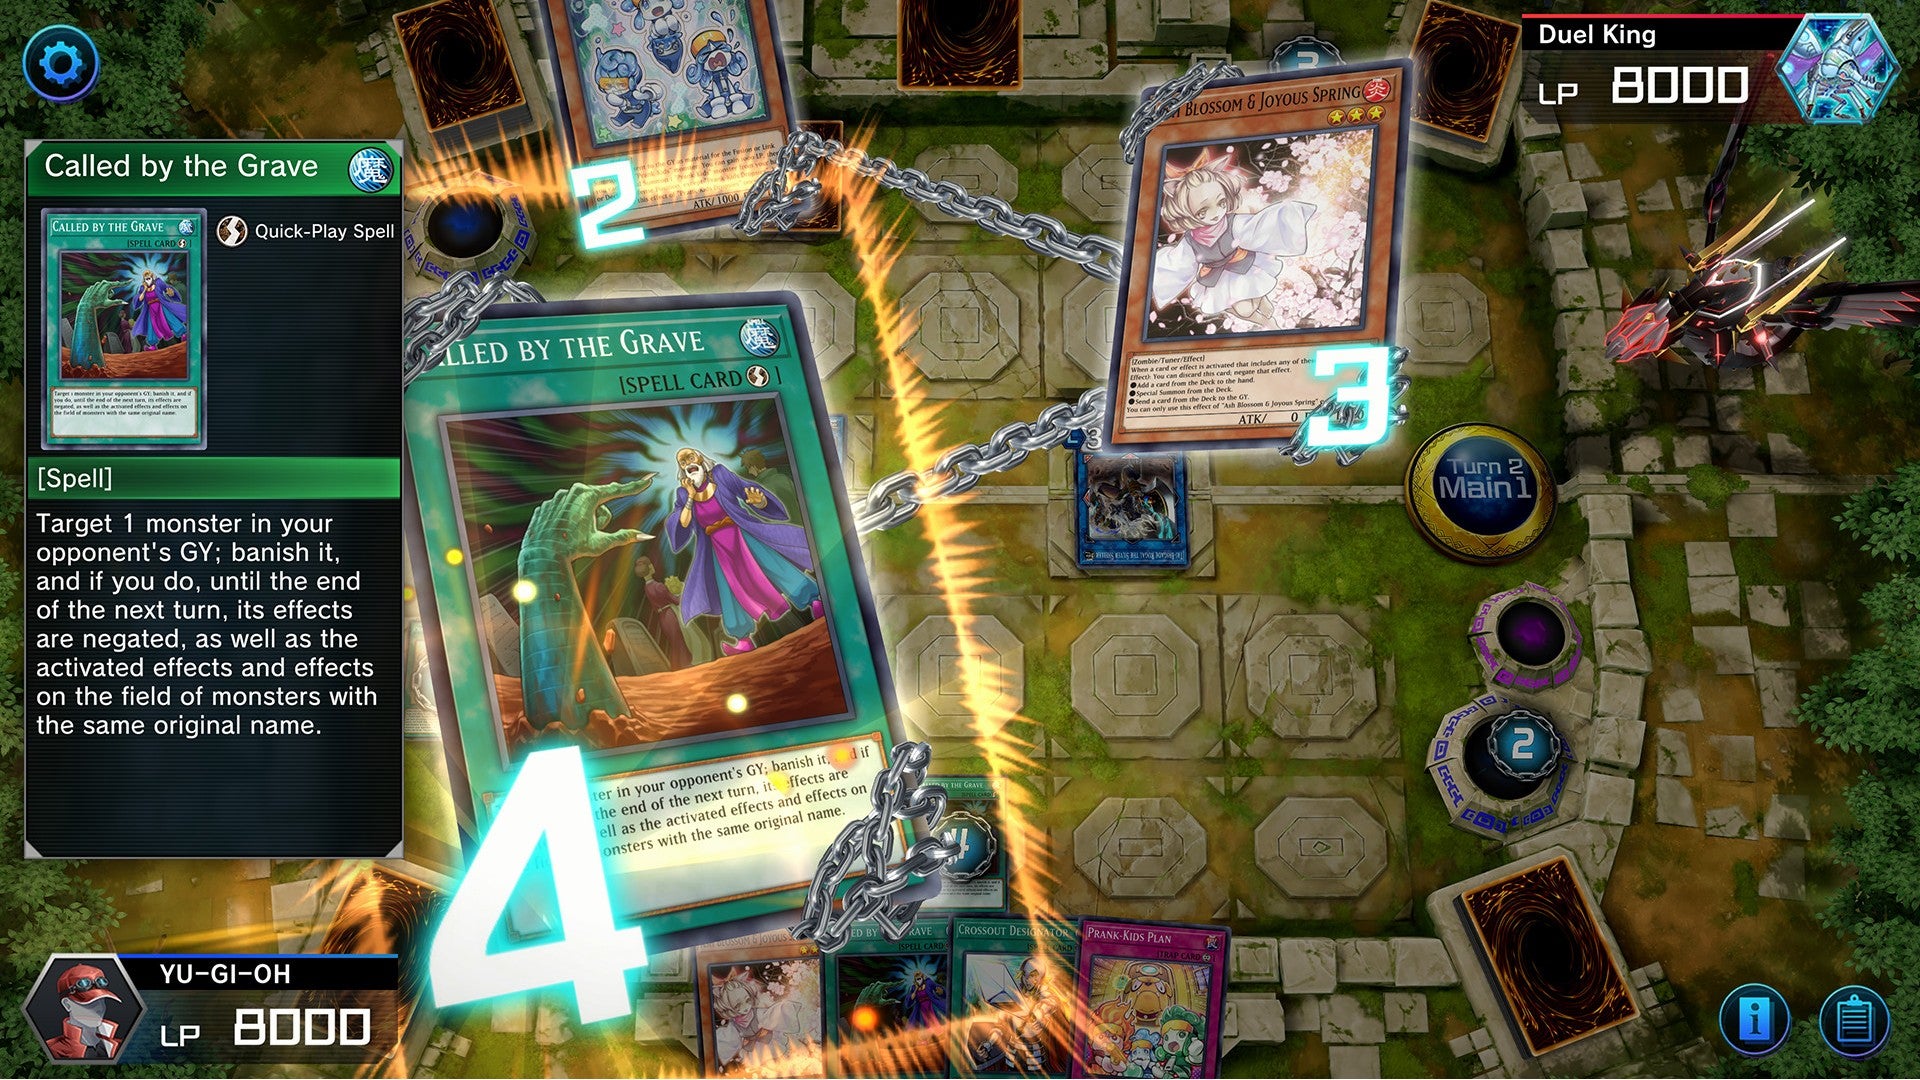 Yu-Gi-Oh Master Duel Called By The Grave spell card and Ash Blossom monster card chained together in spell effect during a duel